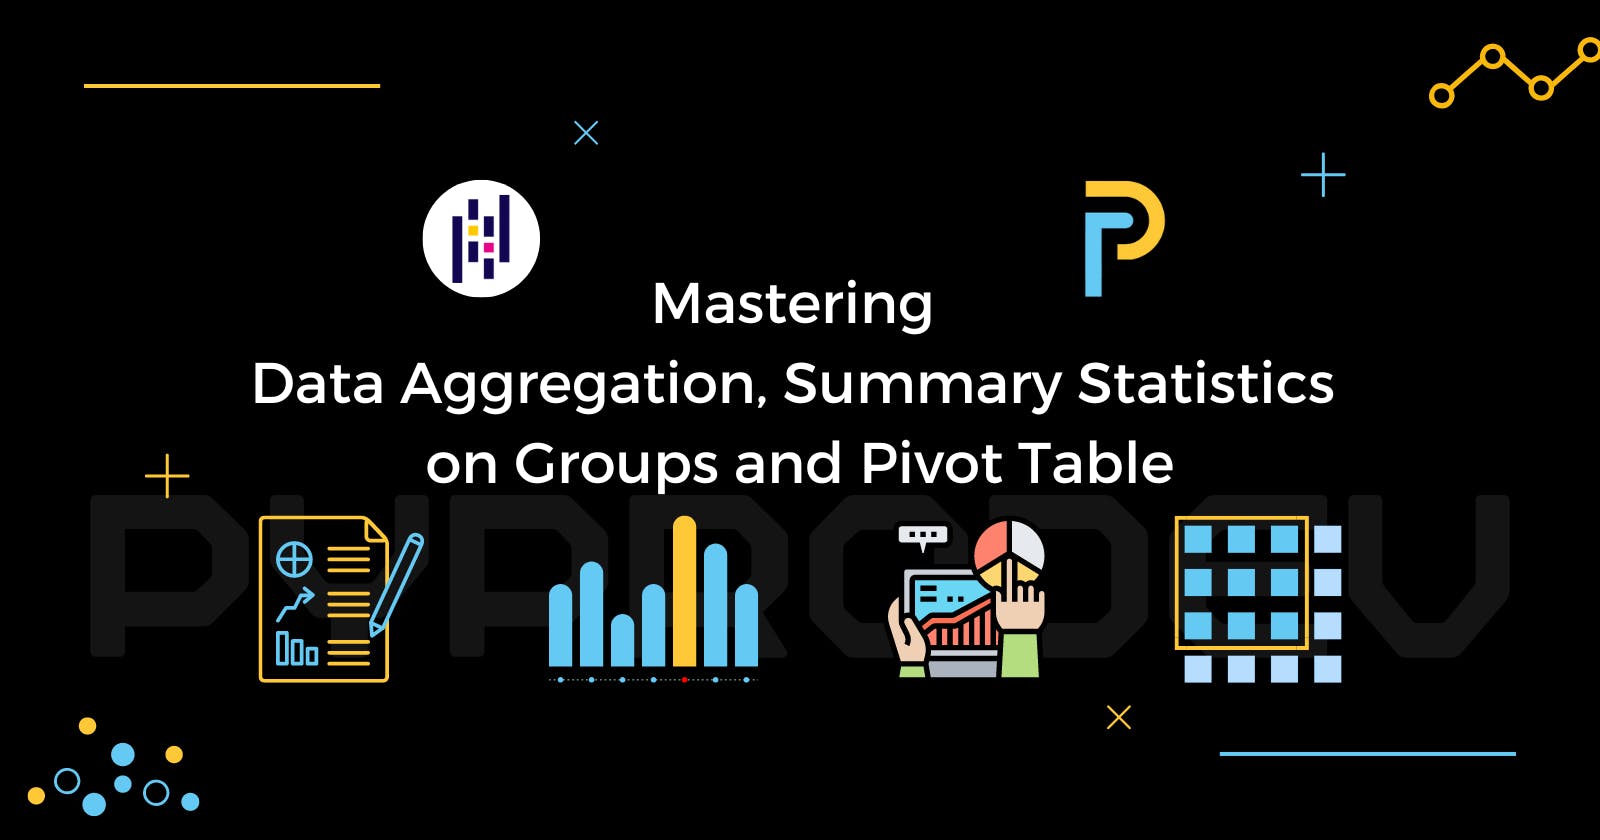 Mastering Data Aggregation, Summary Statistics on Groups and Pivot Table